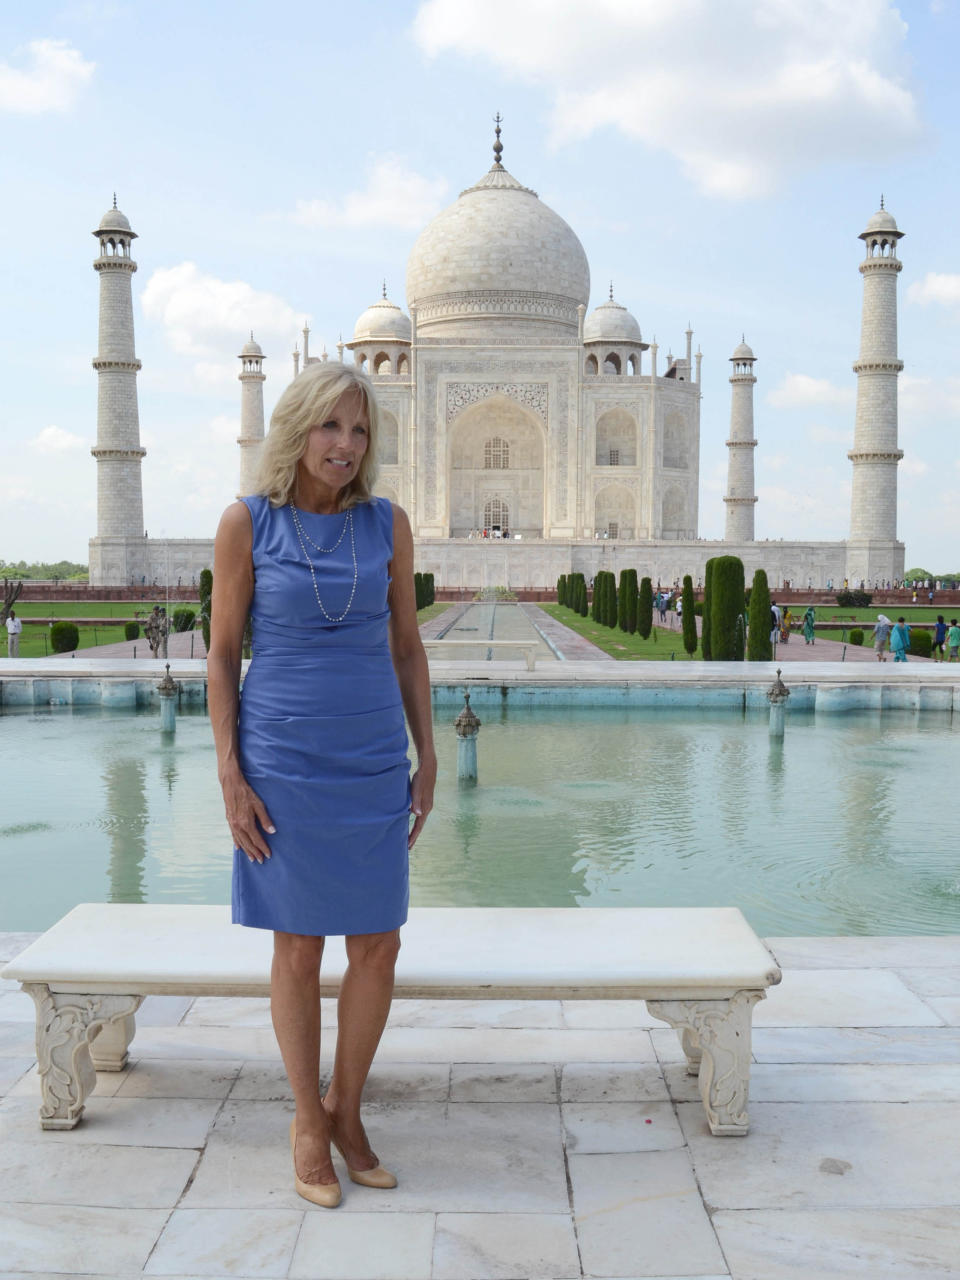 Jill Biden, wife of US Vice President Joe Biden, poses during a visit to the Taj Mahal monument in Agra on July 23, 2013.   (STRDEL/AFP/Getty Images)